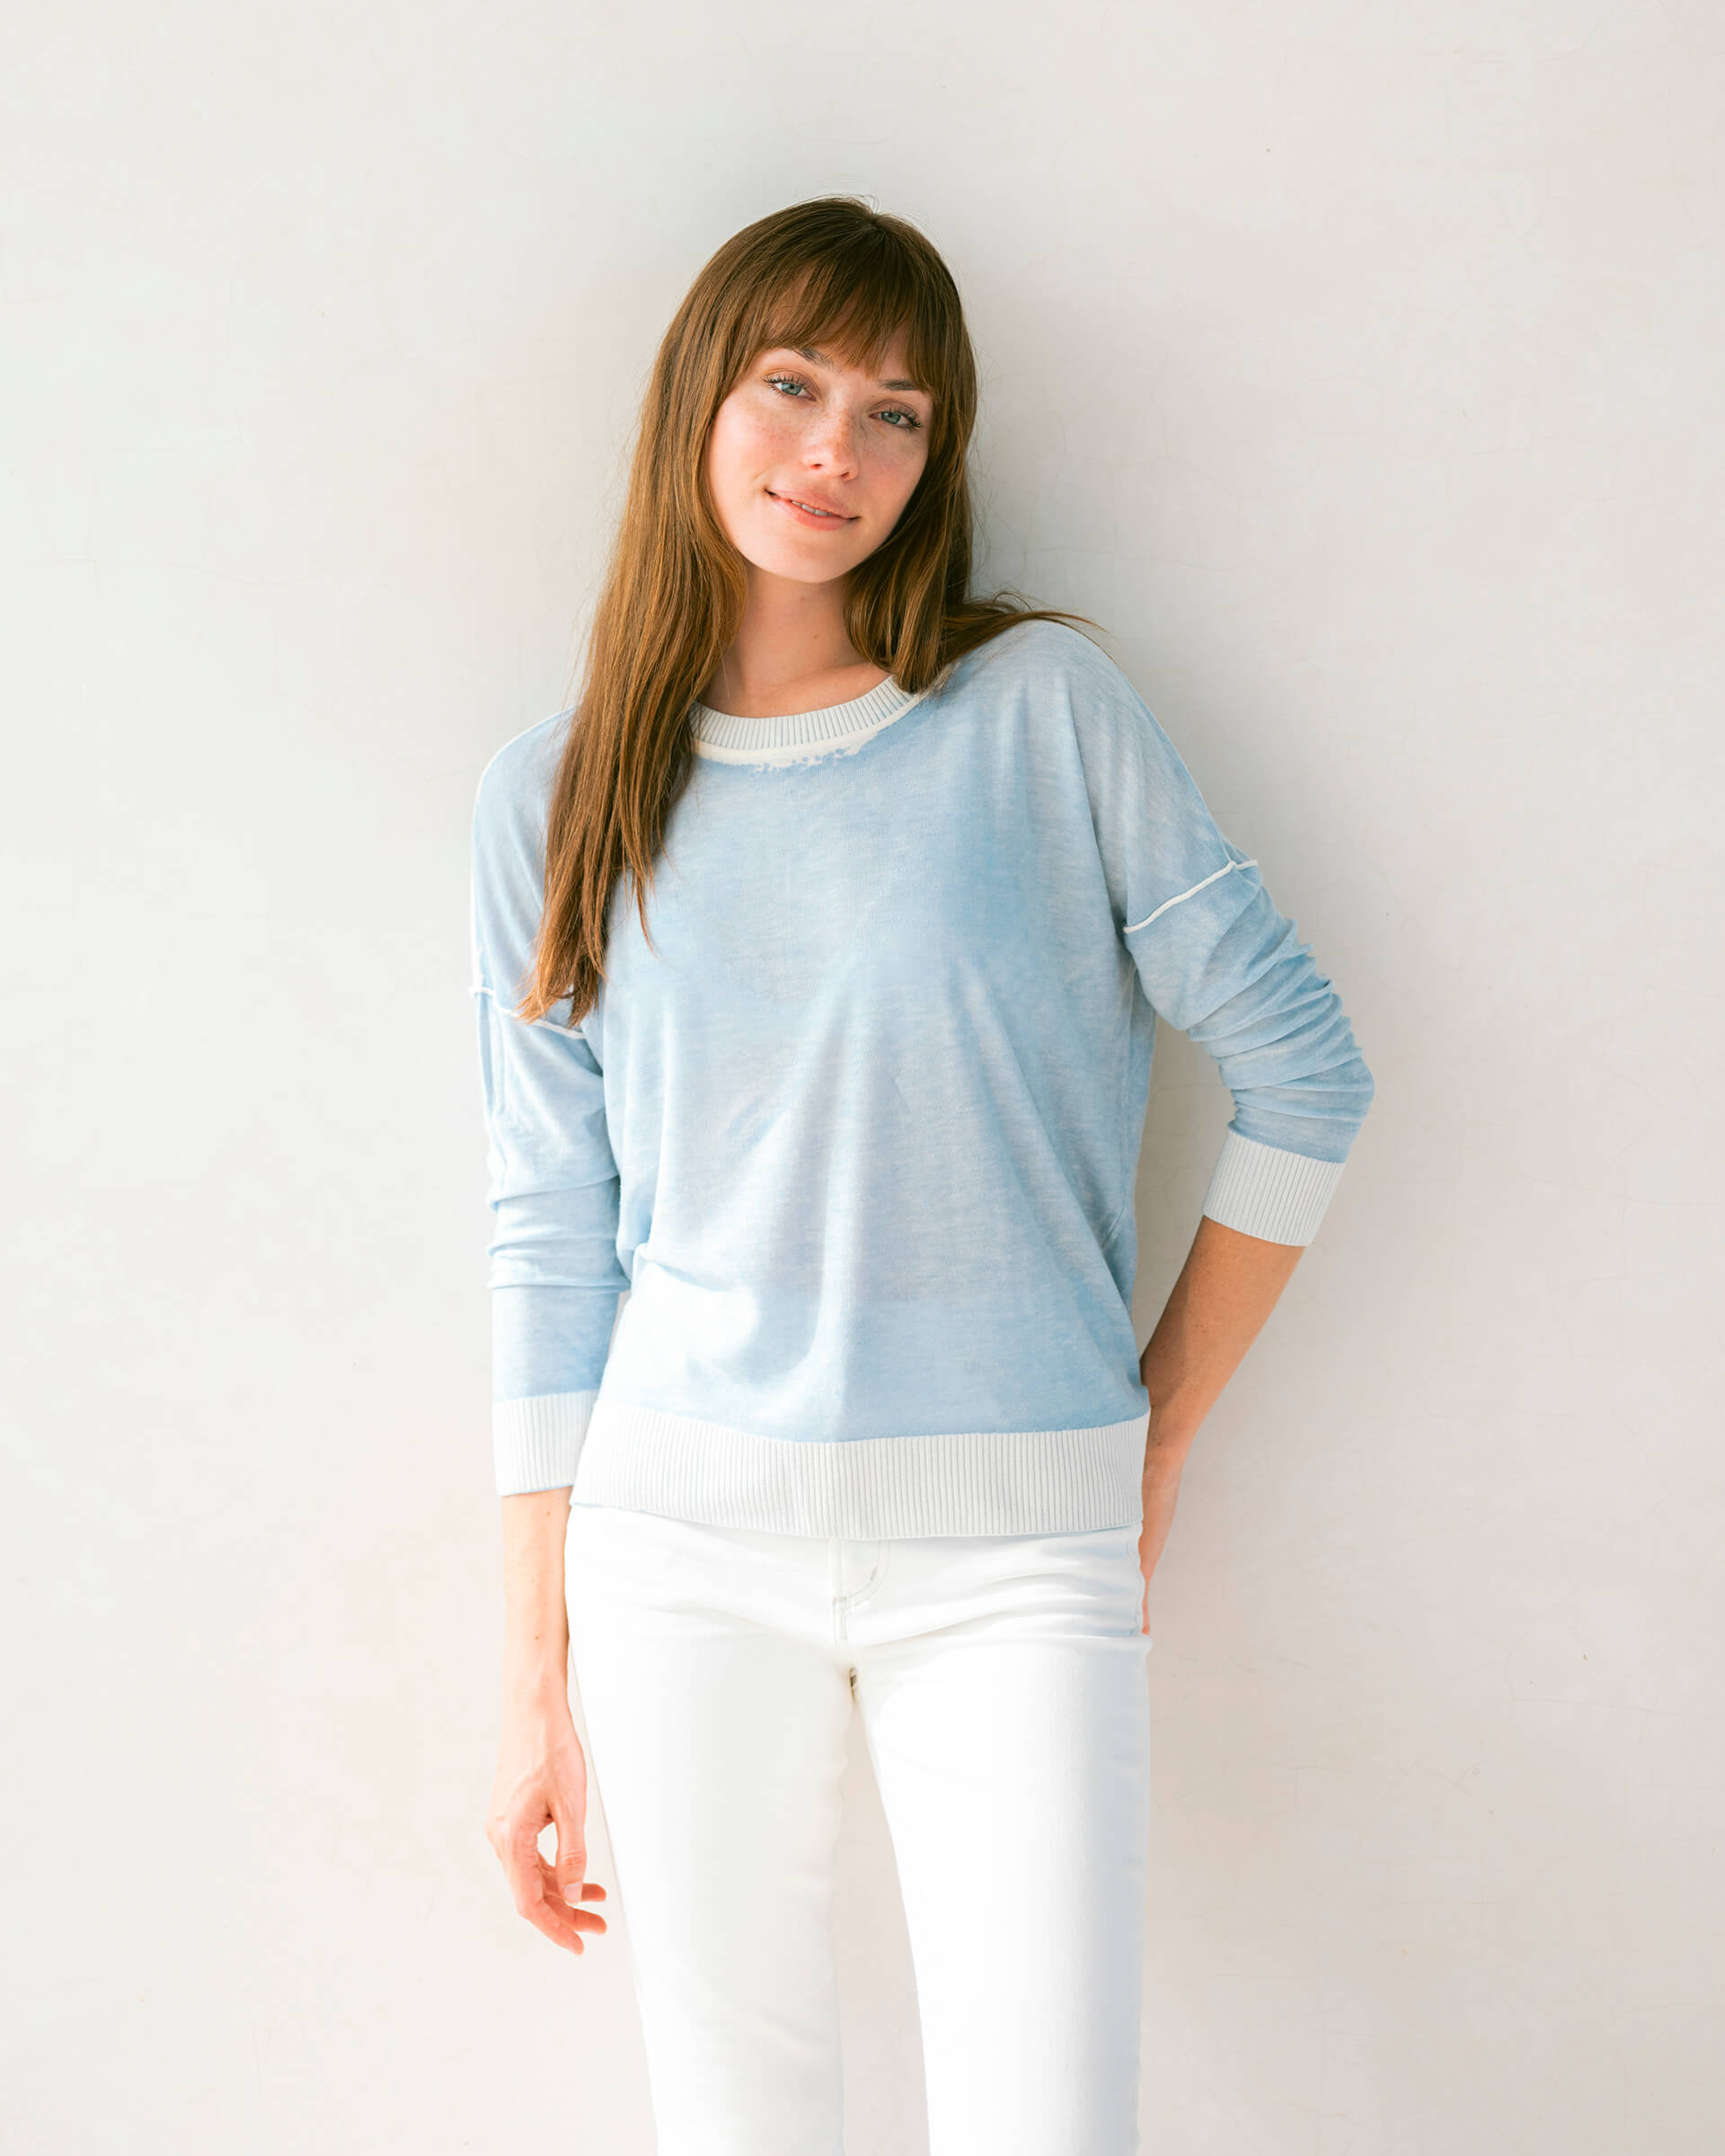 brunette female wearing light blue sweater standing in front of a white wall with an arm on her hip